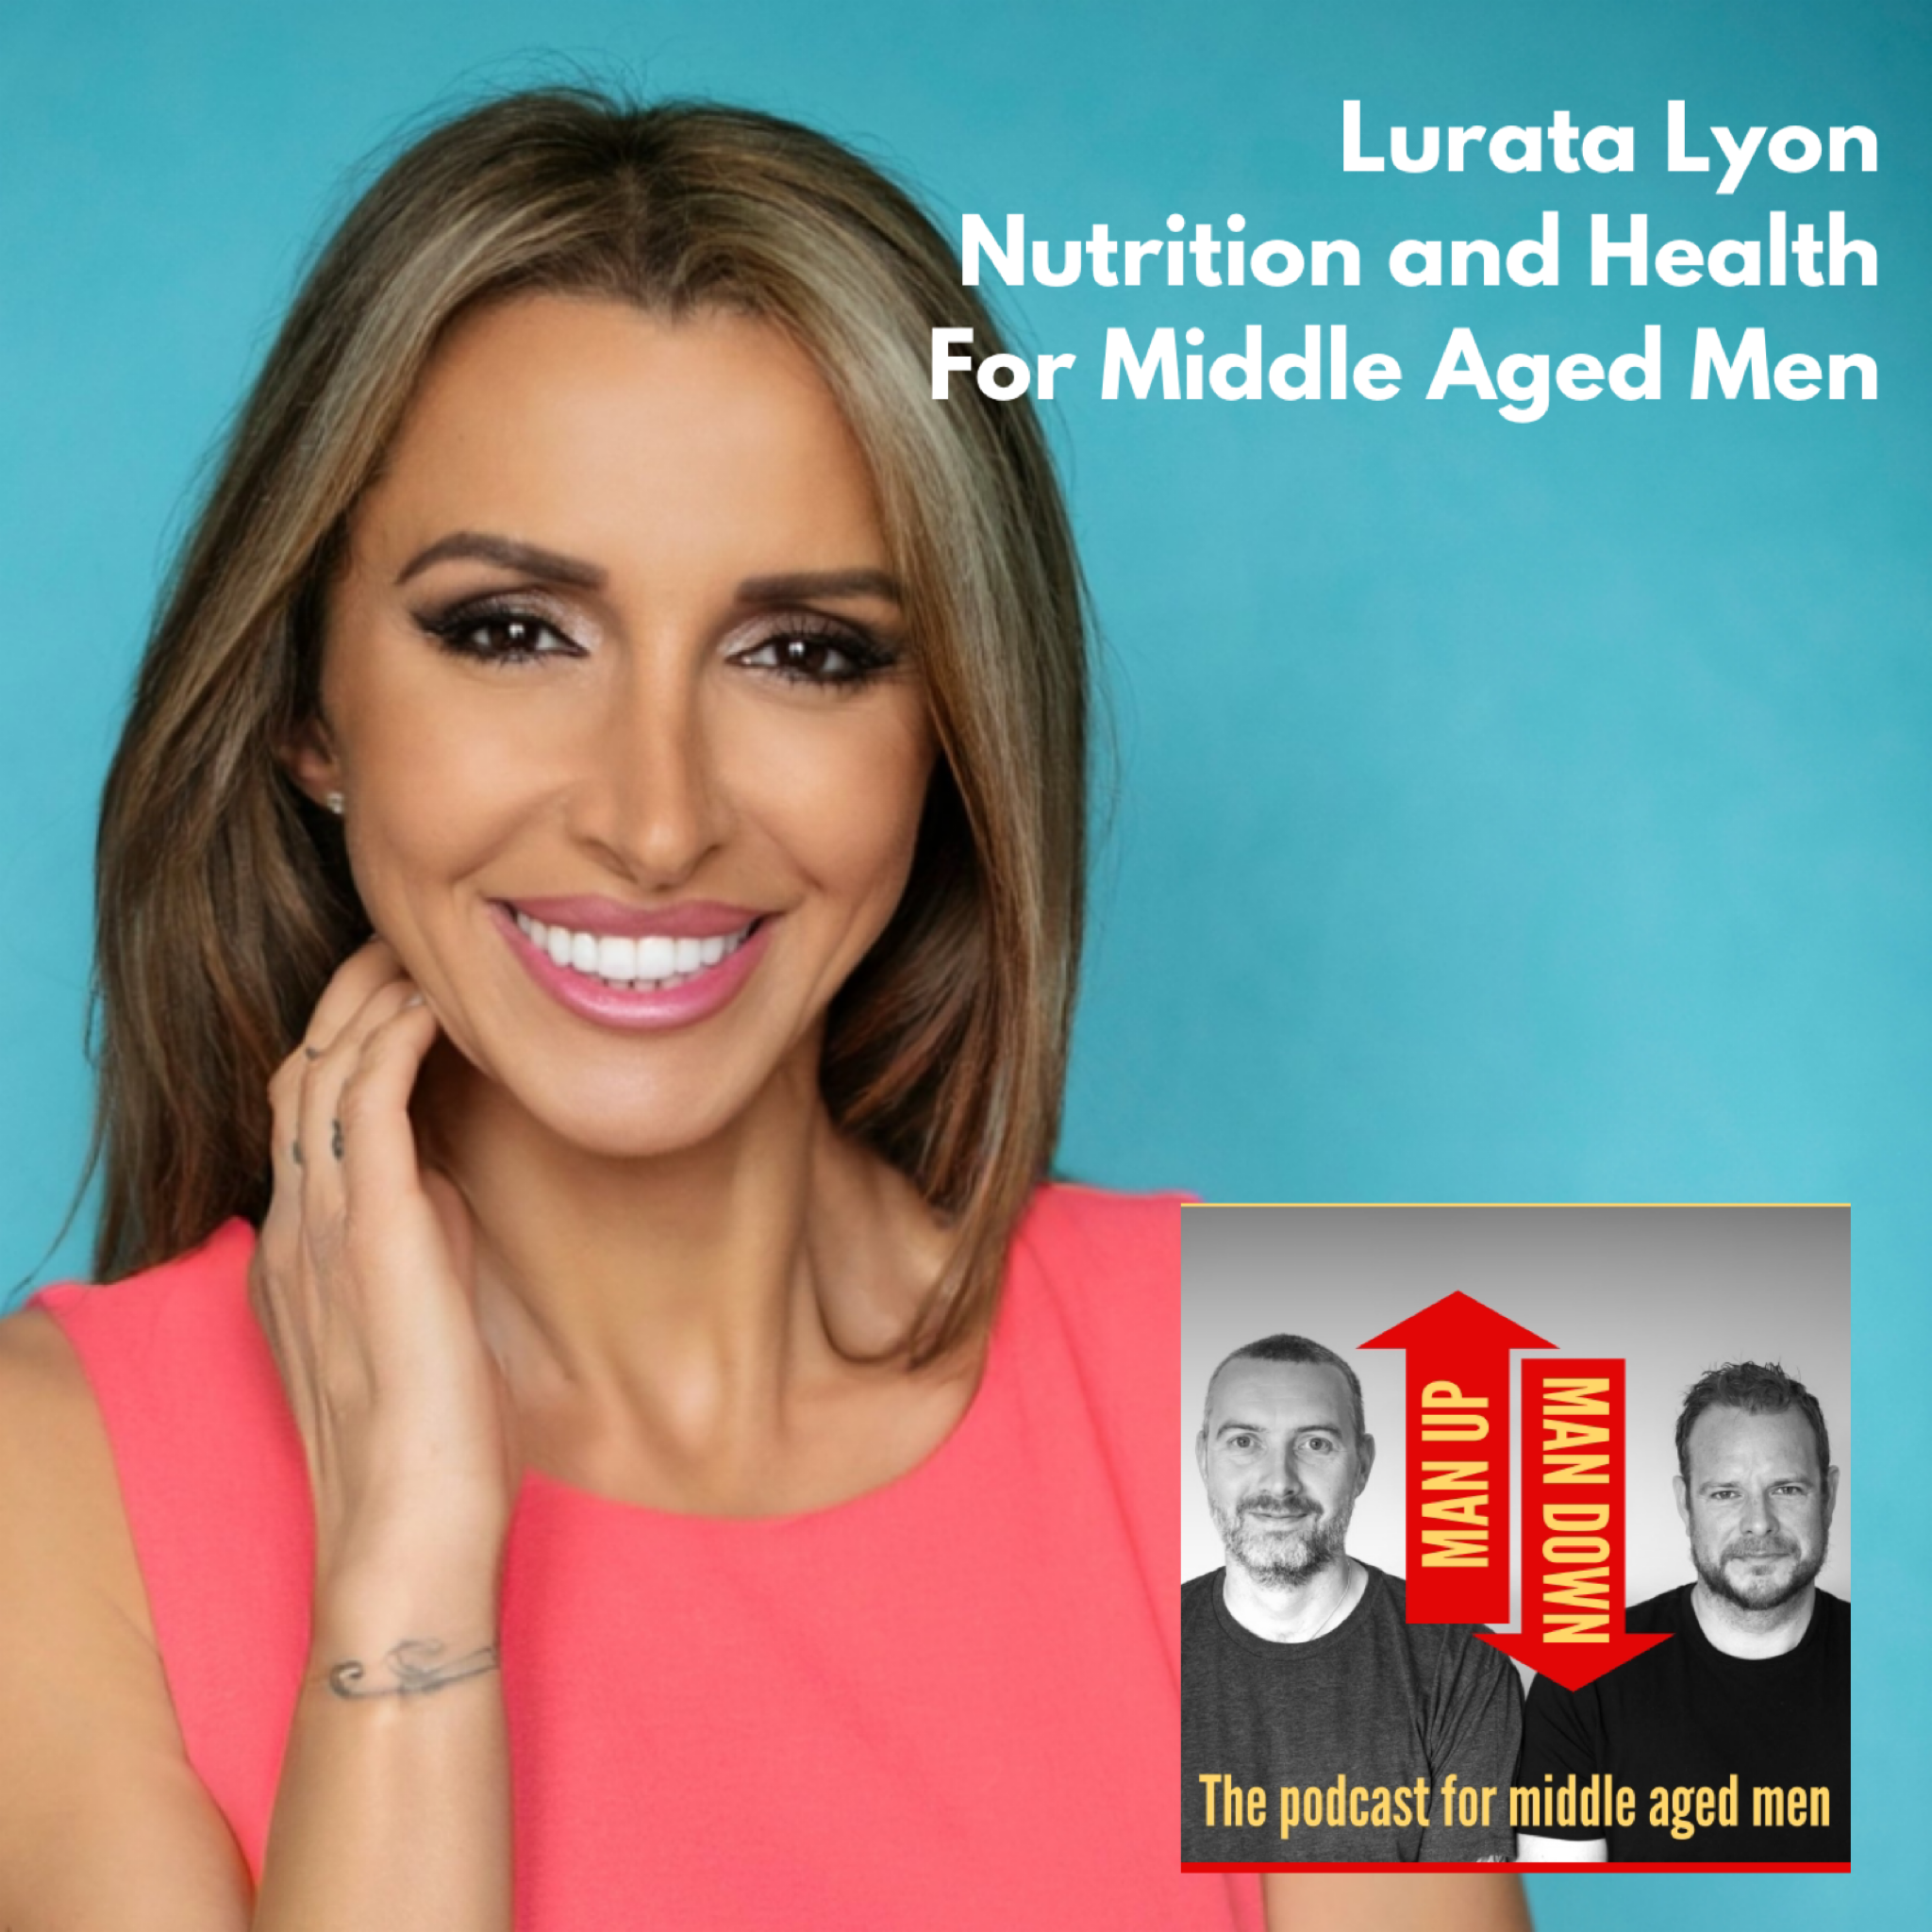 Nutrition and Health for Middle Aged Men - Lurata Lyon